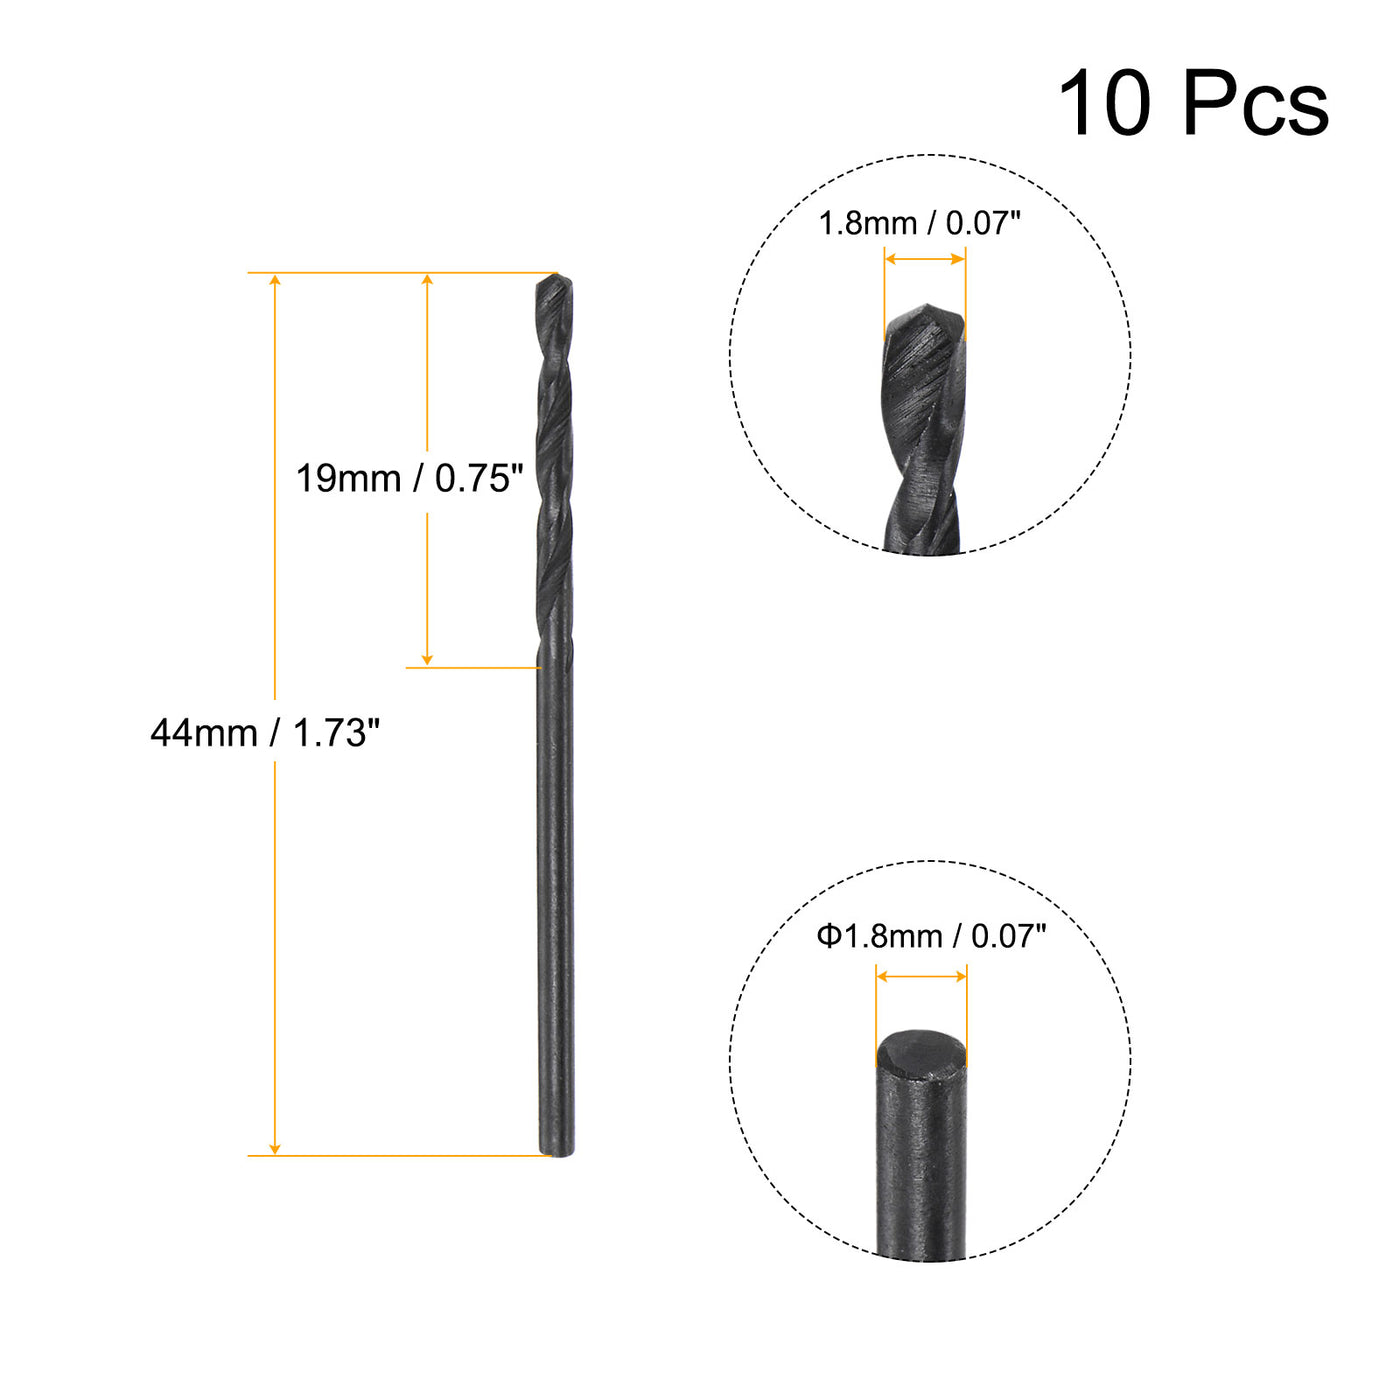 uxcell Uxcell High Speed Steel Twist Drill Bit, 1.8mm Fully Ground Black Oxide 44mm Long 10Pcs